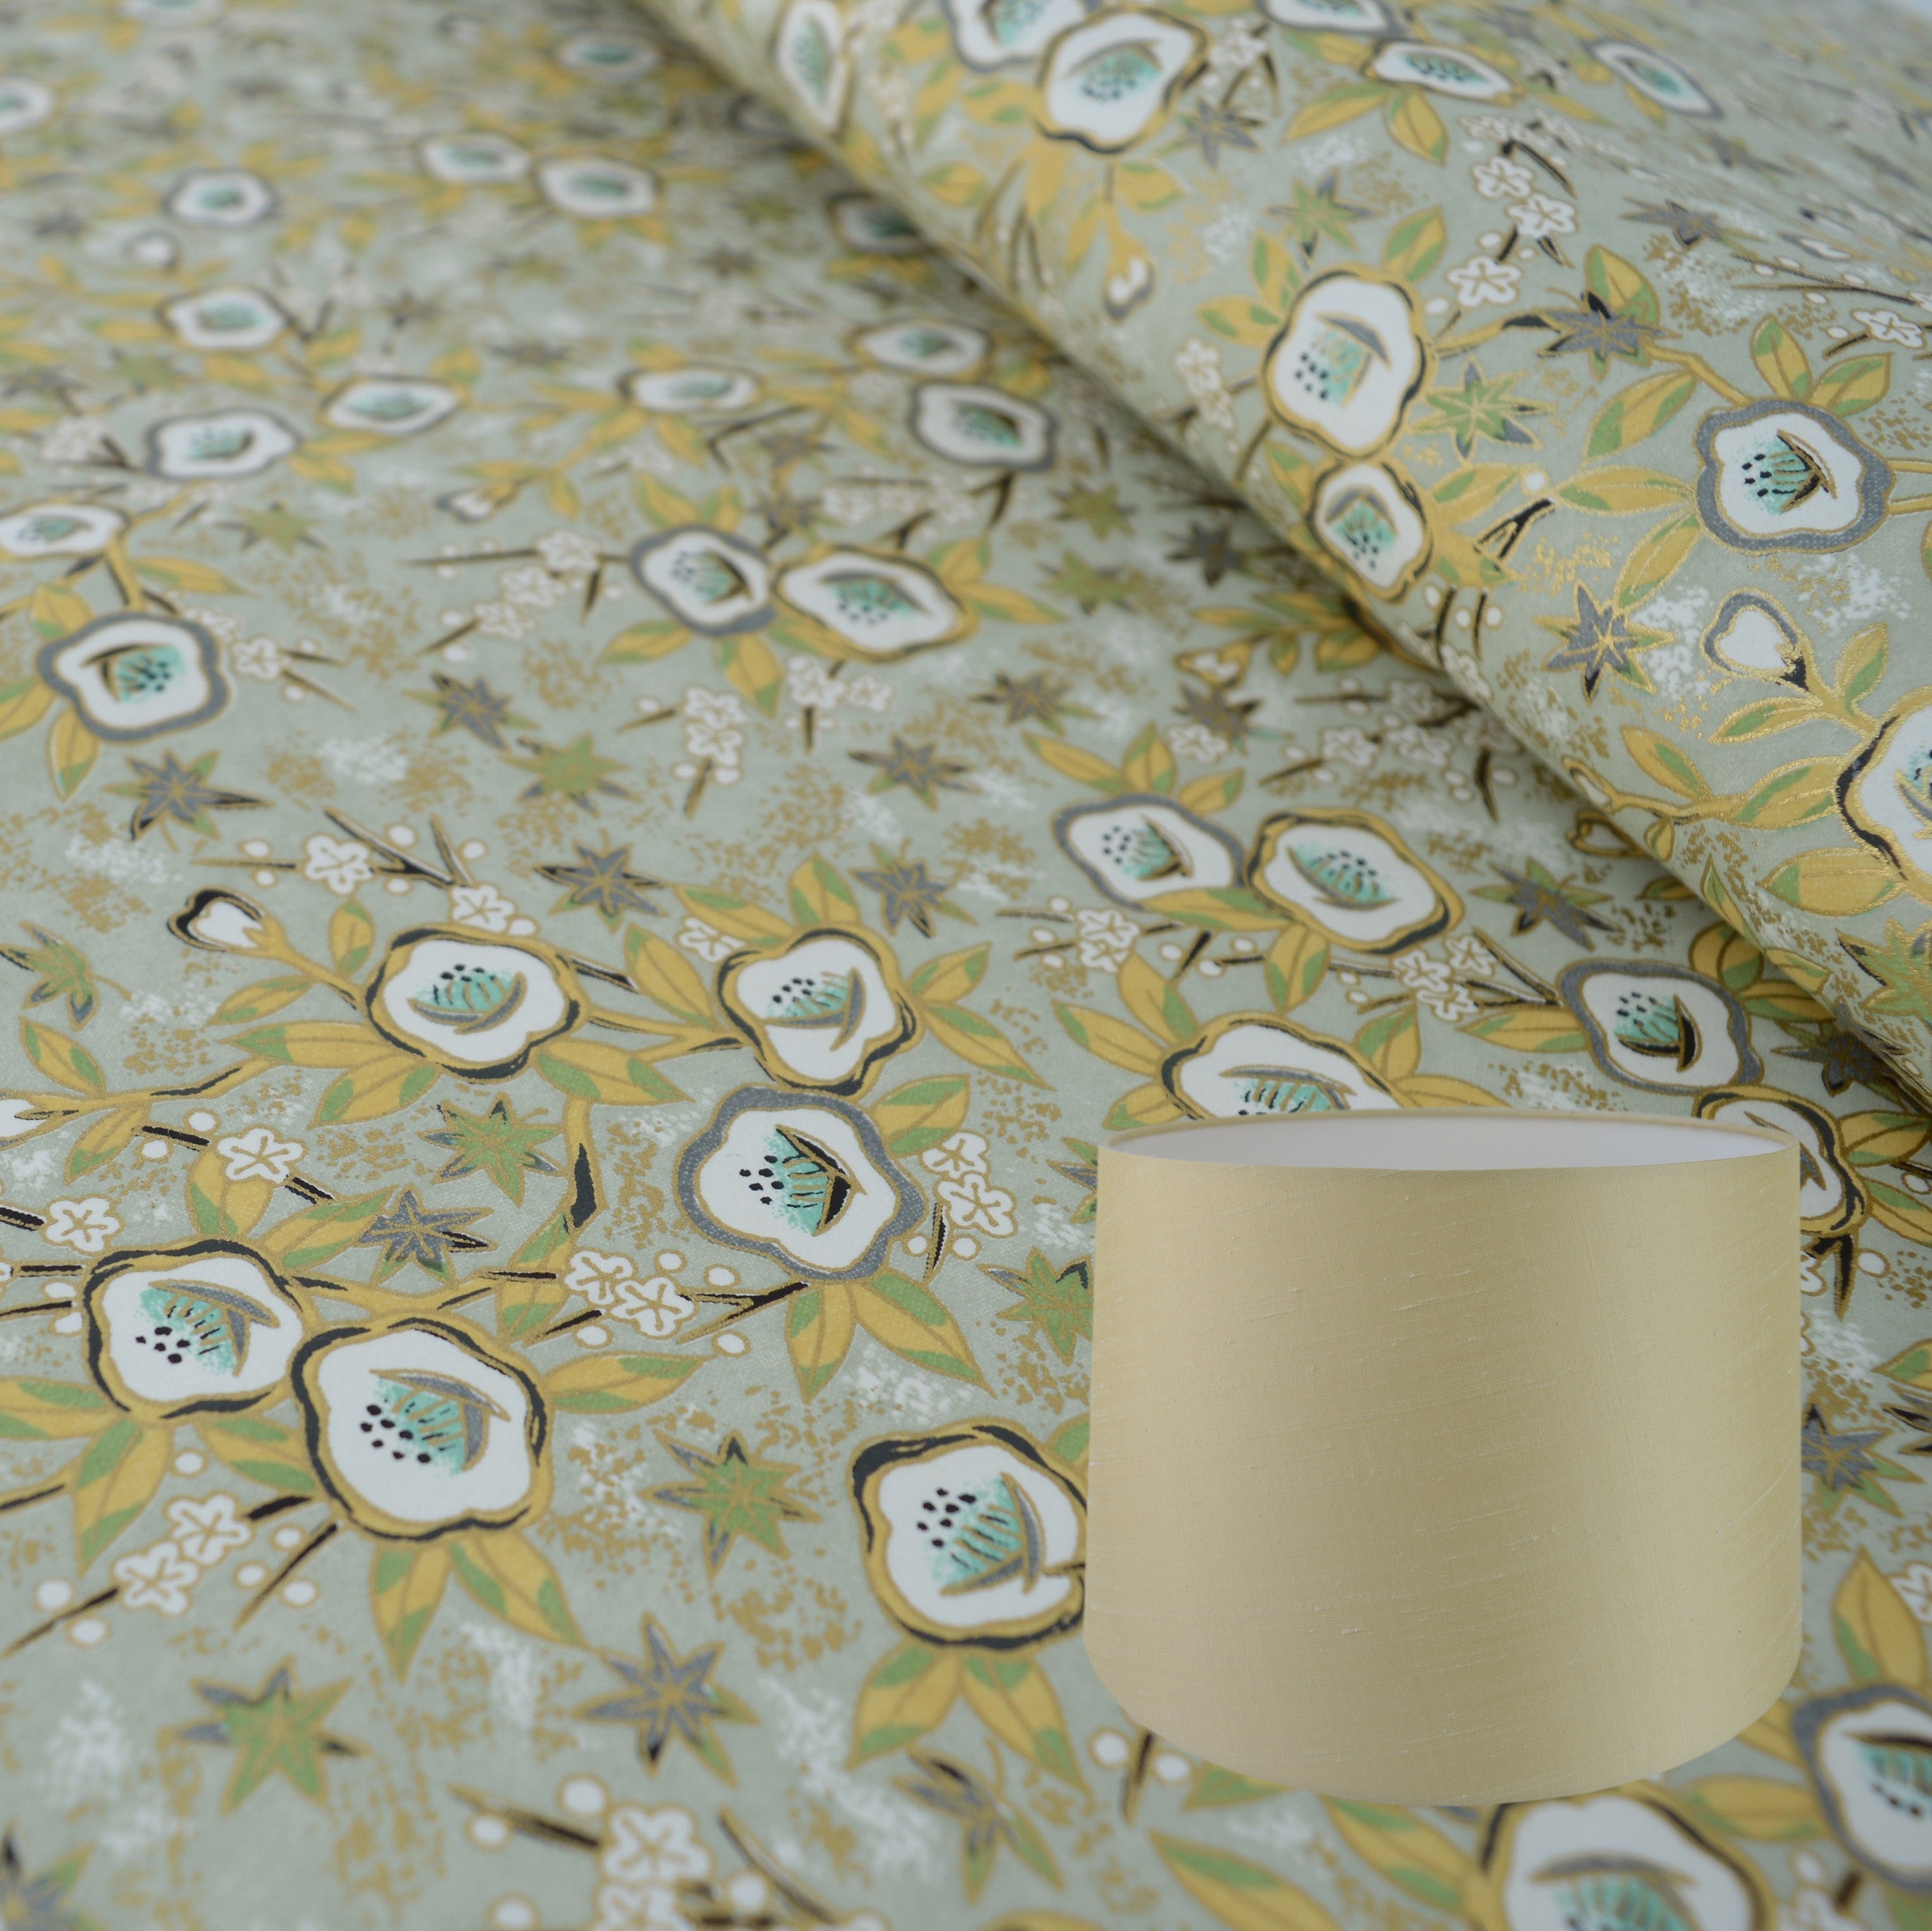 Munro and Kerr gold floral chiyogami paper for making into lampshades